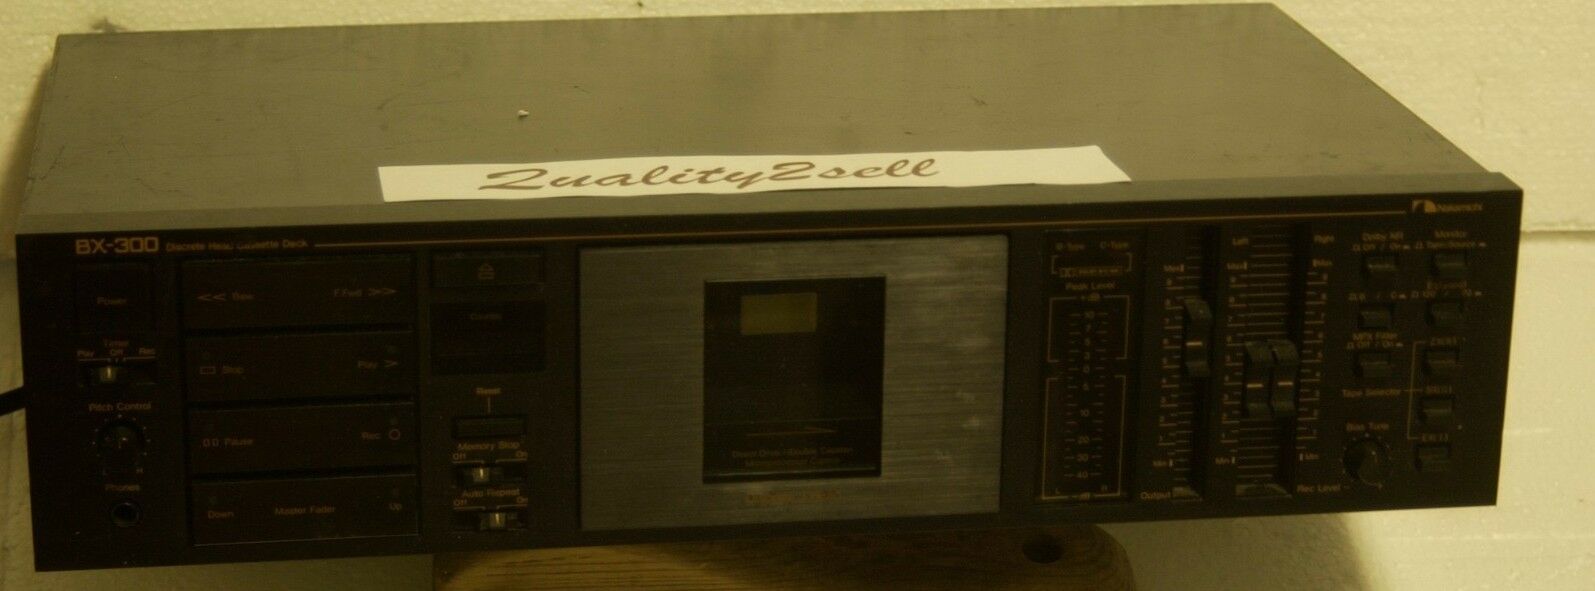 Nakamichi Bx-300 3 Head Direct Drive Cassette Deck  Fully Serviced 120-240v